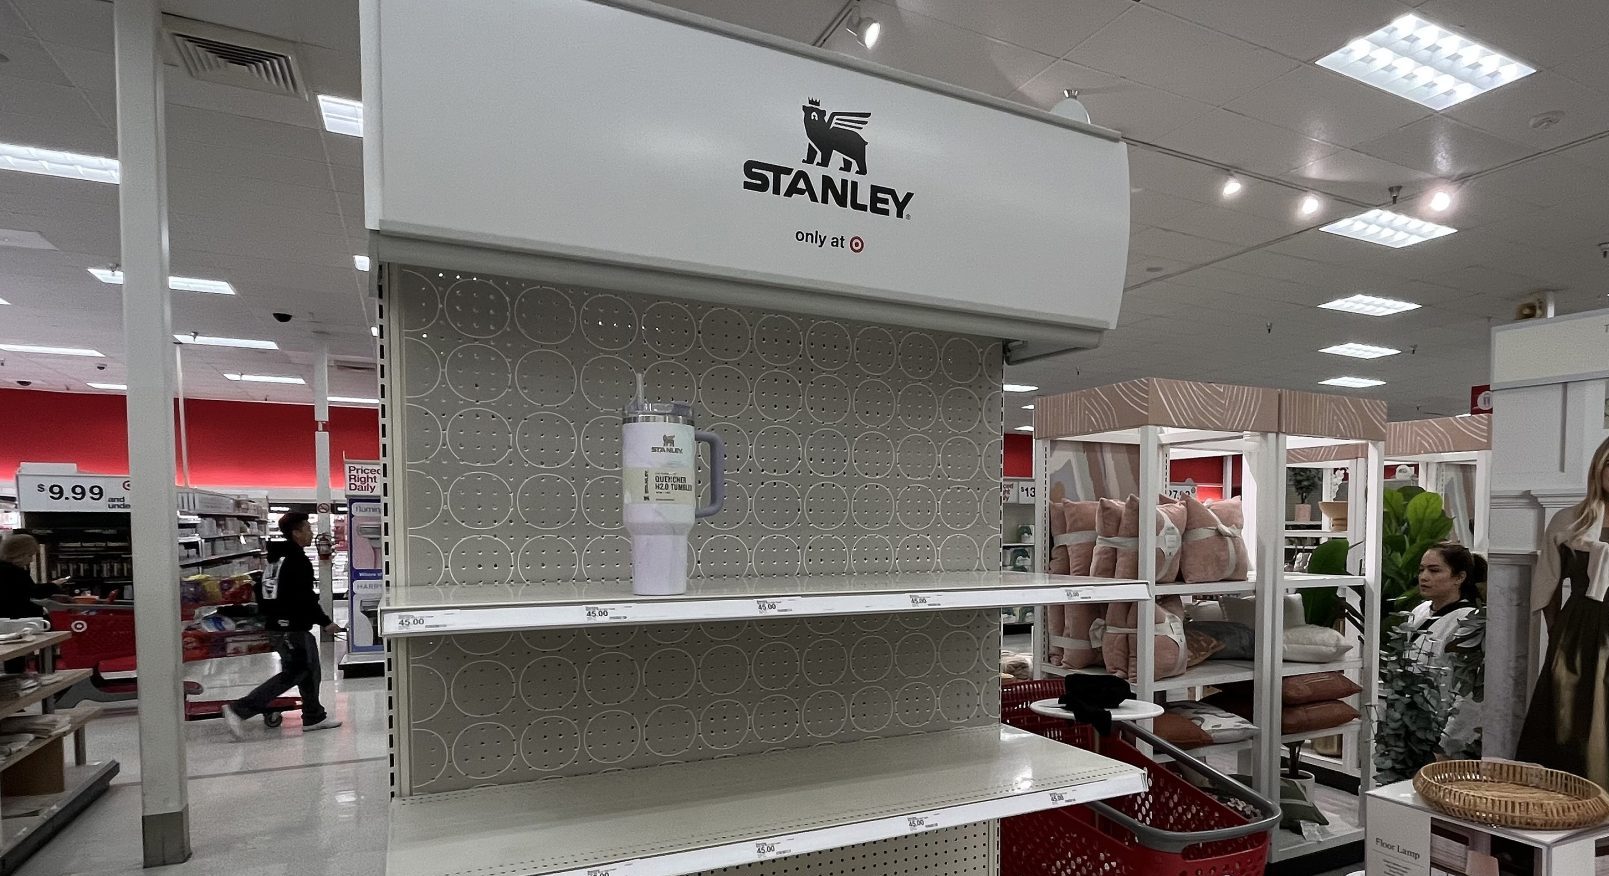 WEST HILLS CA JANUARY 9, 2024 - There was only one Stanley Cup left on the shelf at the Target in West Hills on Monday, January 9, 2024.